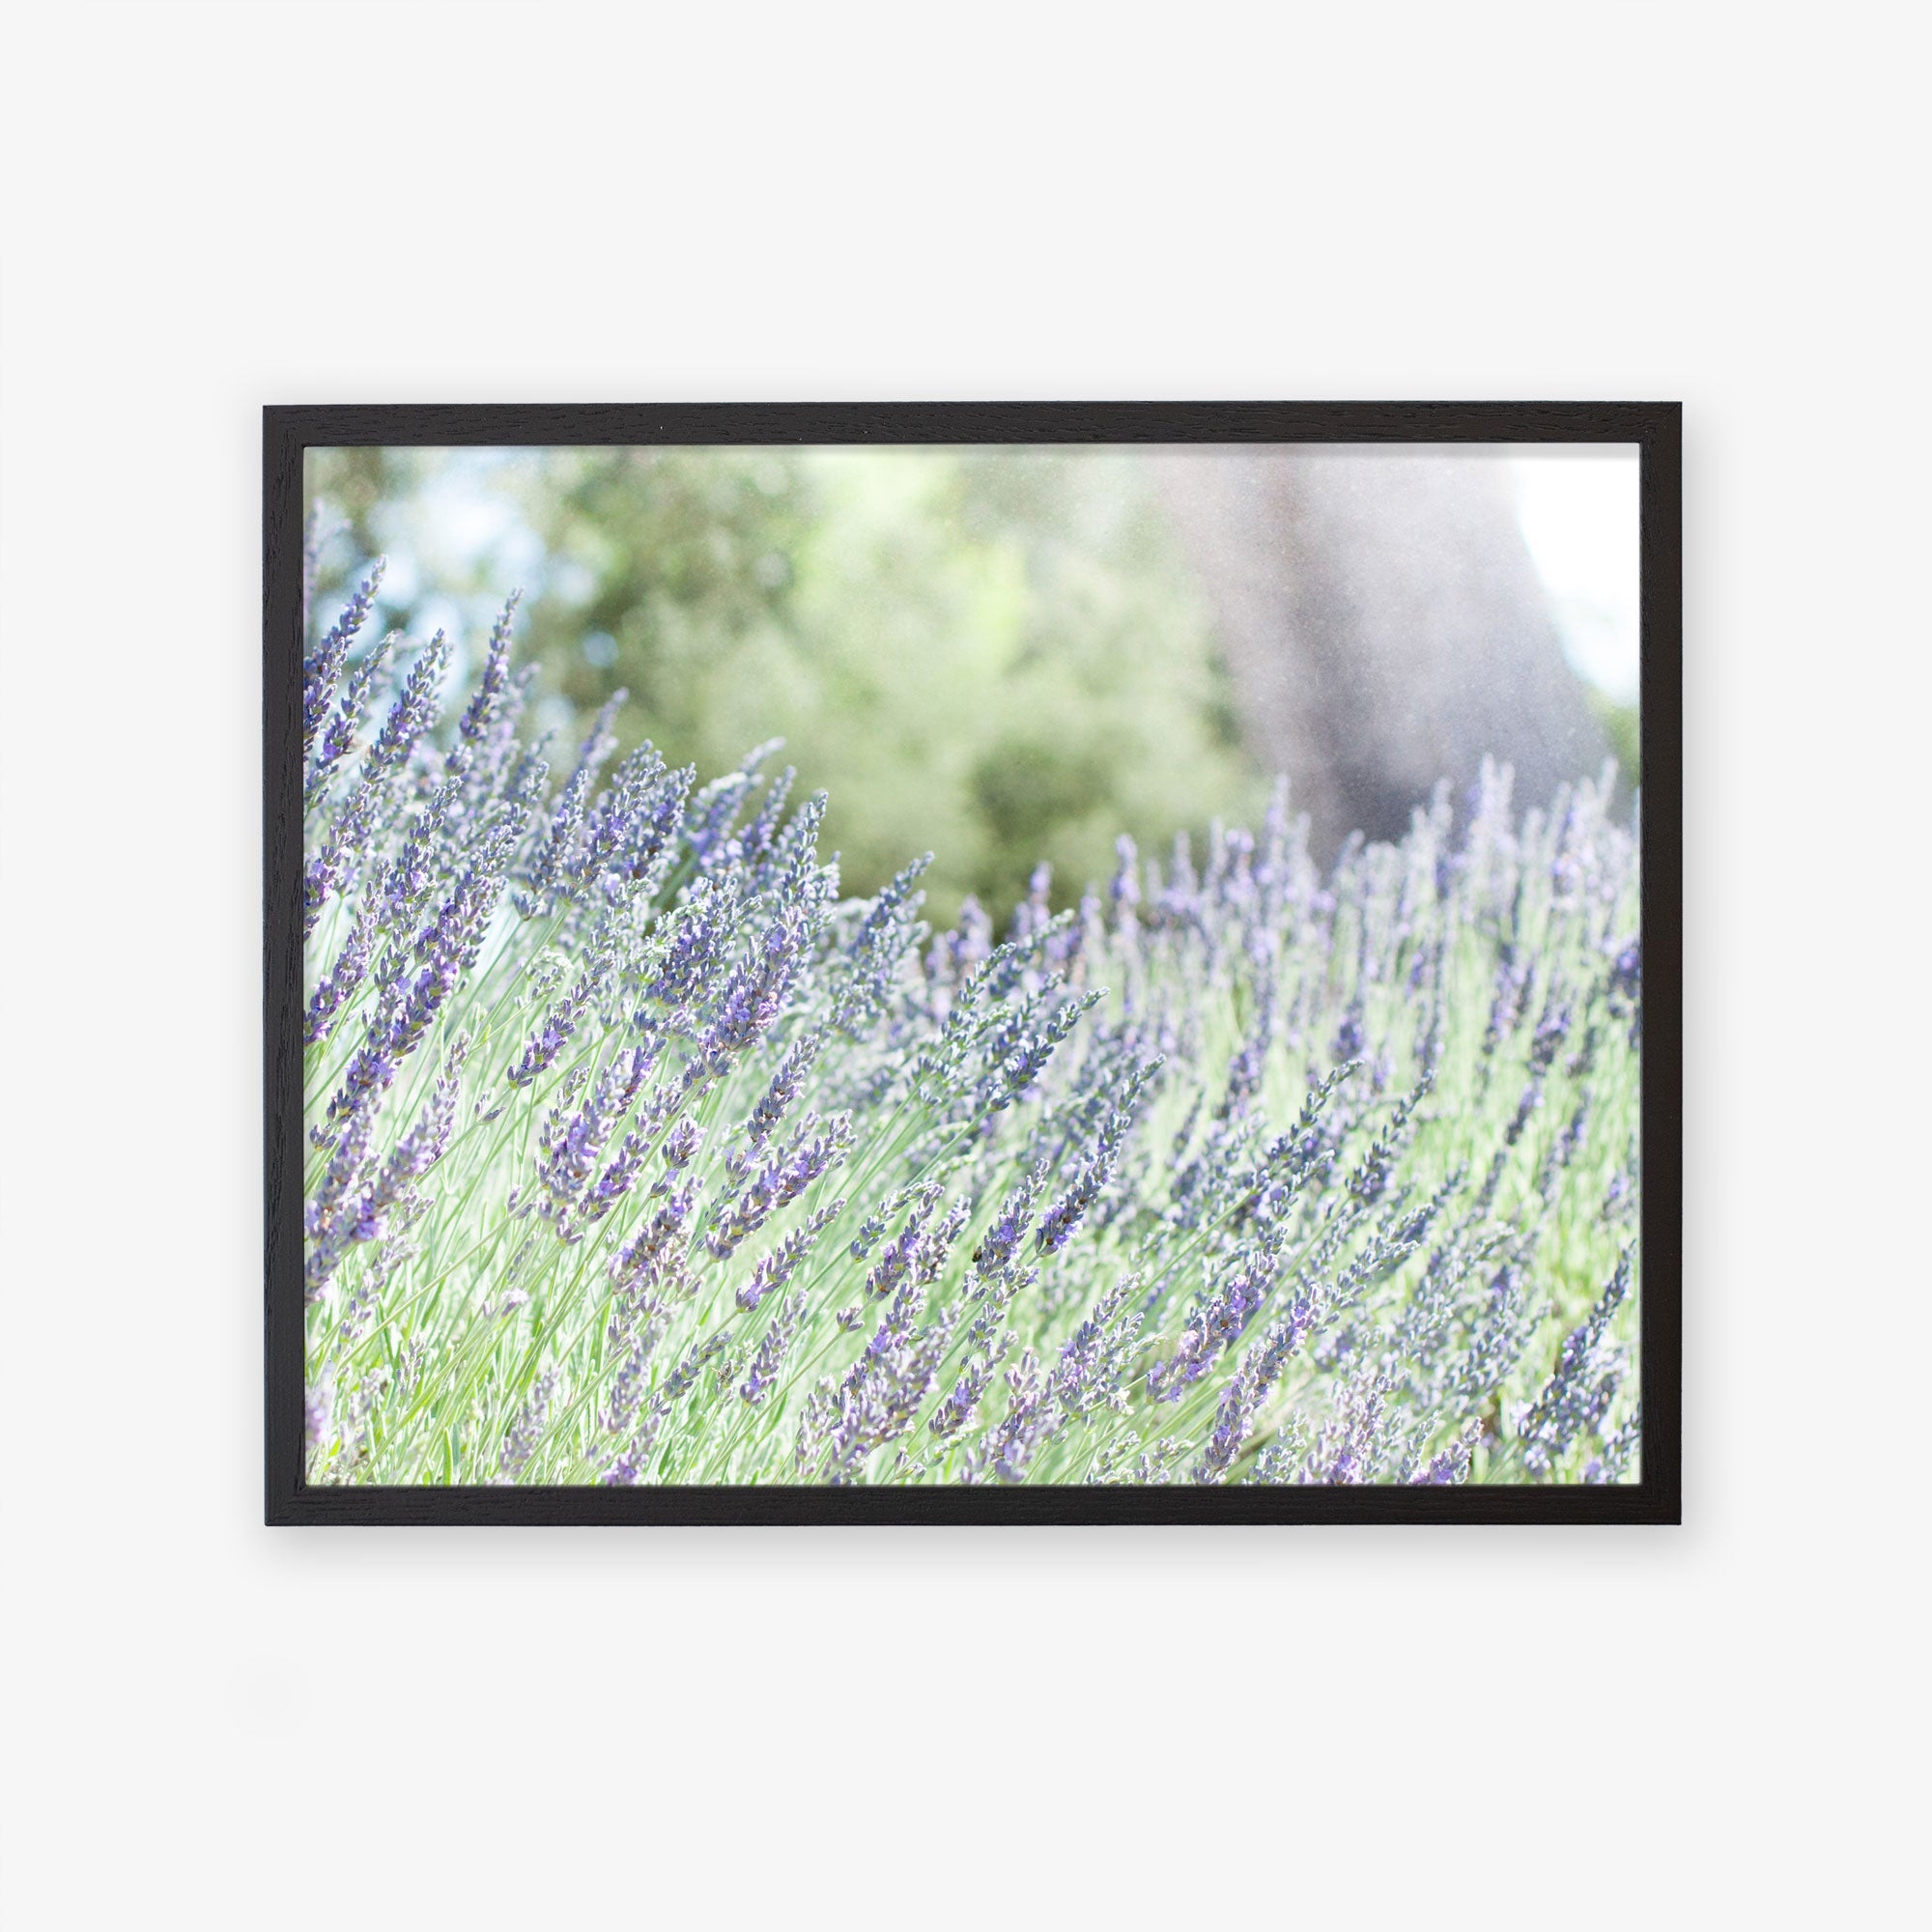 A Rustic Floral Print, &#39;Fields of Lavender&#39; by Offley Green captures a field of tall, narrow purple flowers on slender green stems. The blurred background reveals more greenery and hints of a tree trunk, evoking a peaceful outdoor scene. Unframed prints of this serene image are available on archival photographic paper.